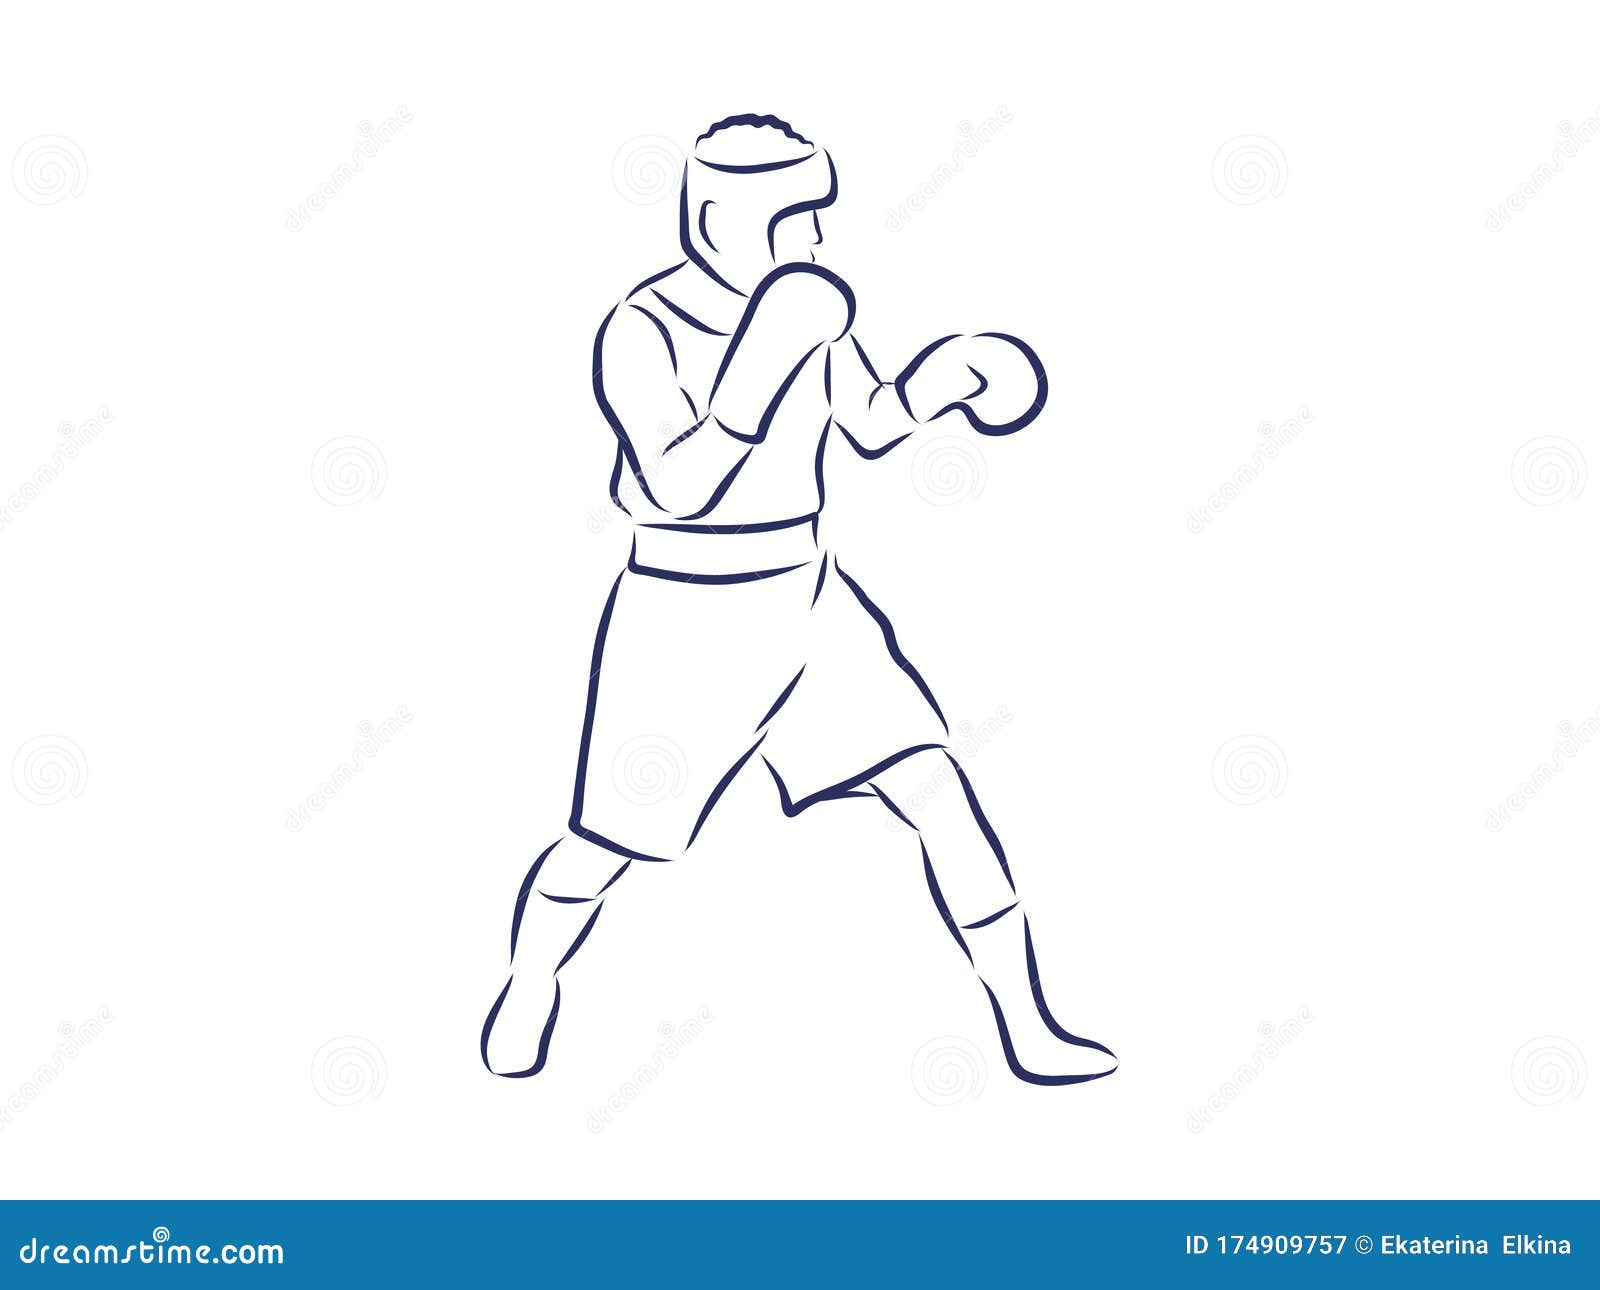 Premium Vector  Kung fu fighter vector sketch kung fu chinese martial art  a hand drawn illustration